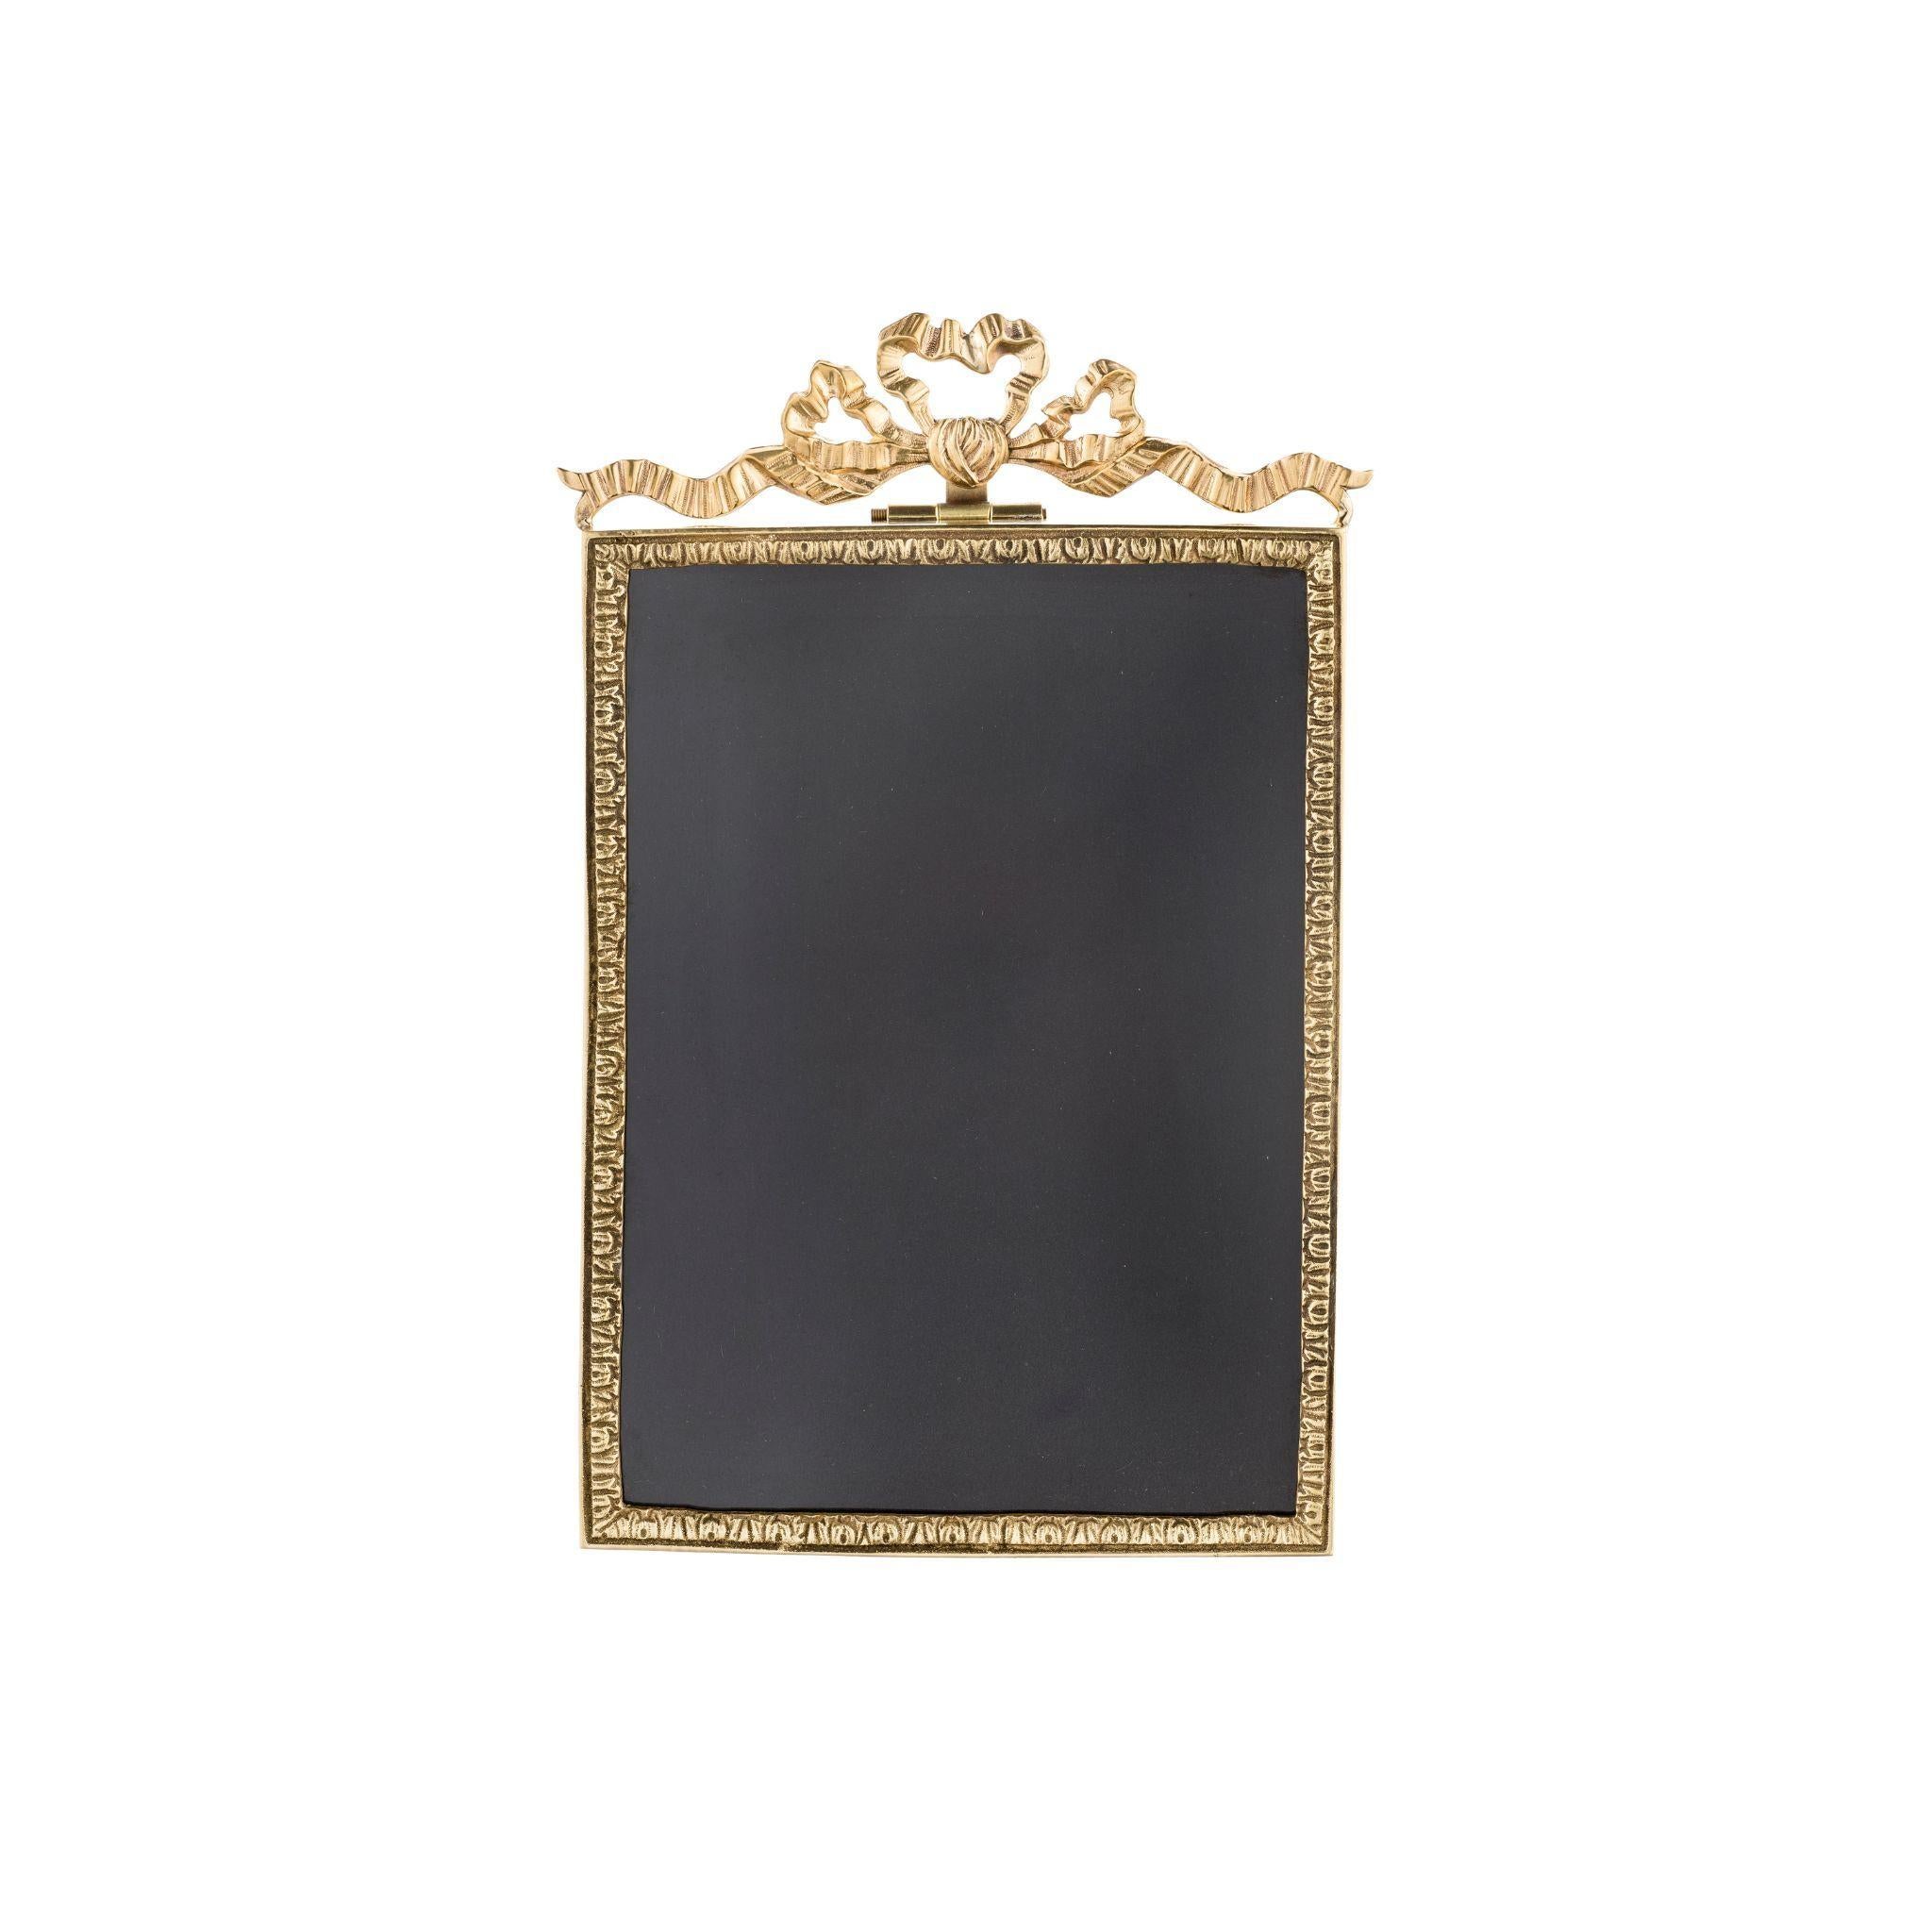 Add a touch of elegance to your home decor with our Sissi brass frame. Featuring a stunning garland design, this baroque-style frame is perfect for displaying your most cherished memories. Shop now and elevate your decor to the next level.